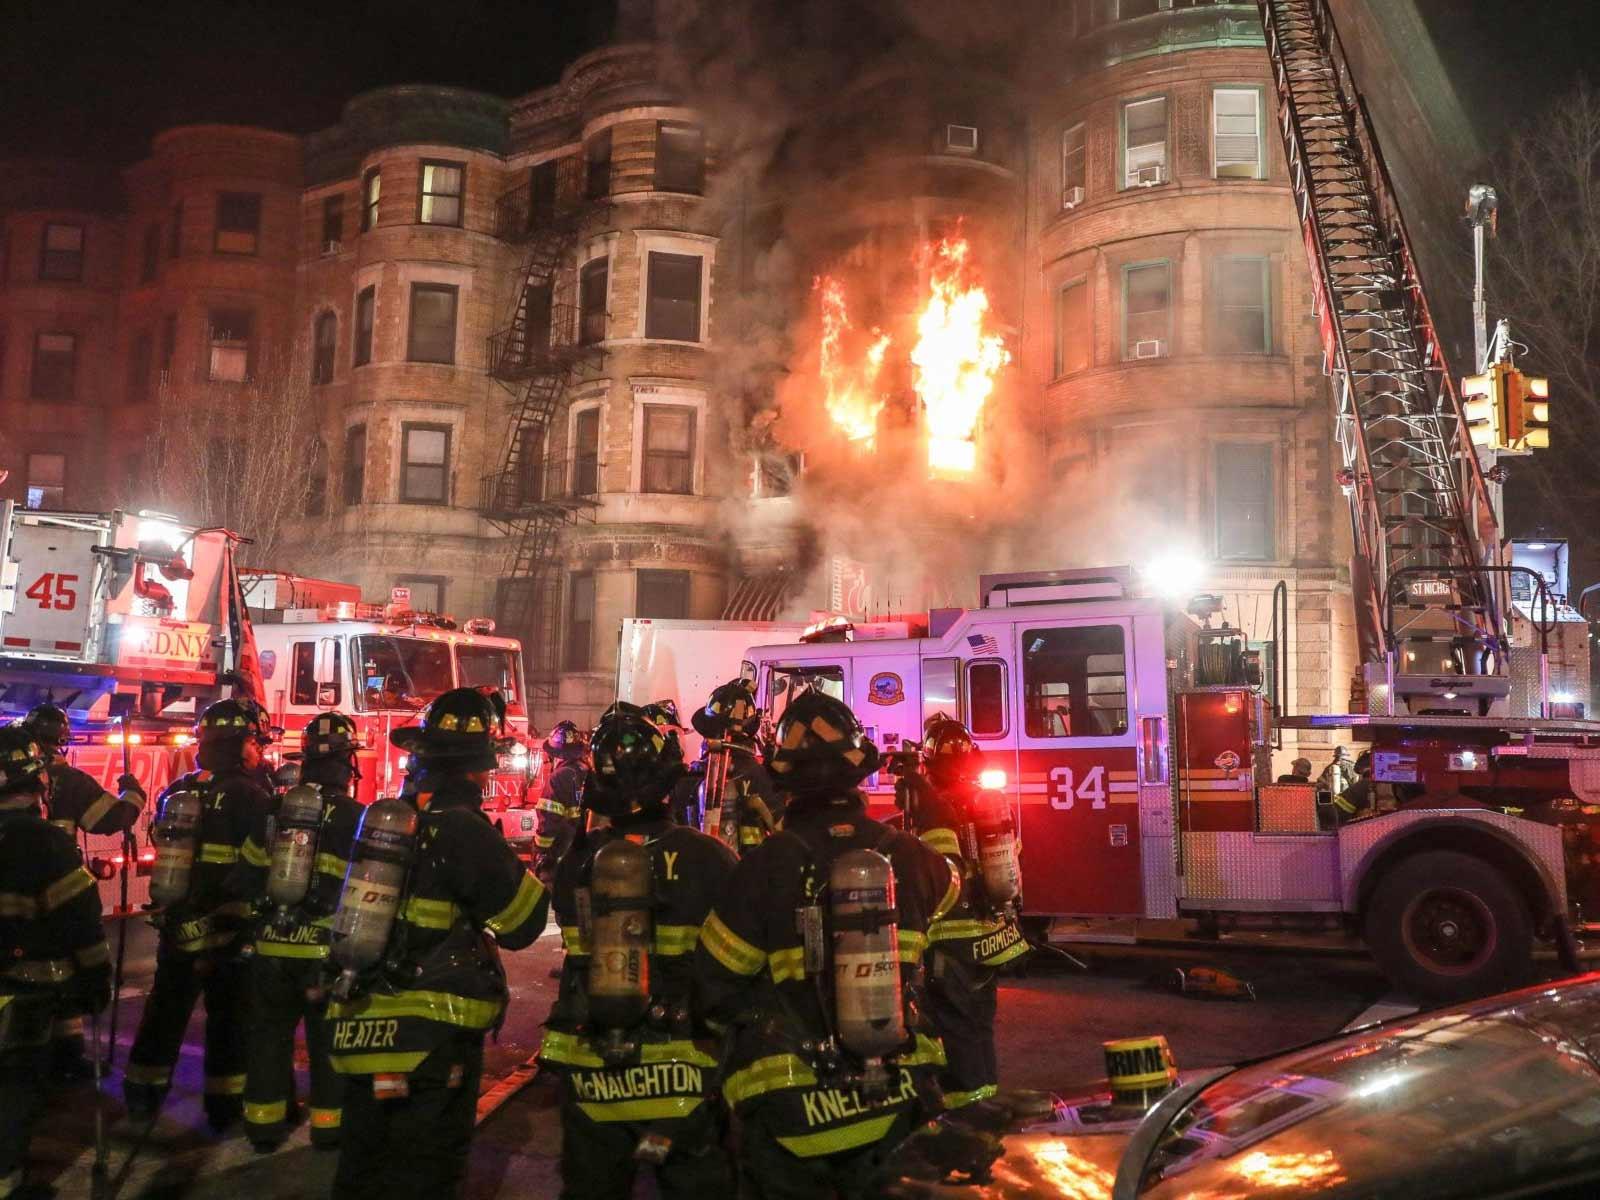 Ed Norton Production Company Sued for $7 Million Over Deadly NYC Fire